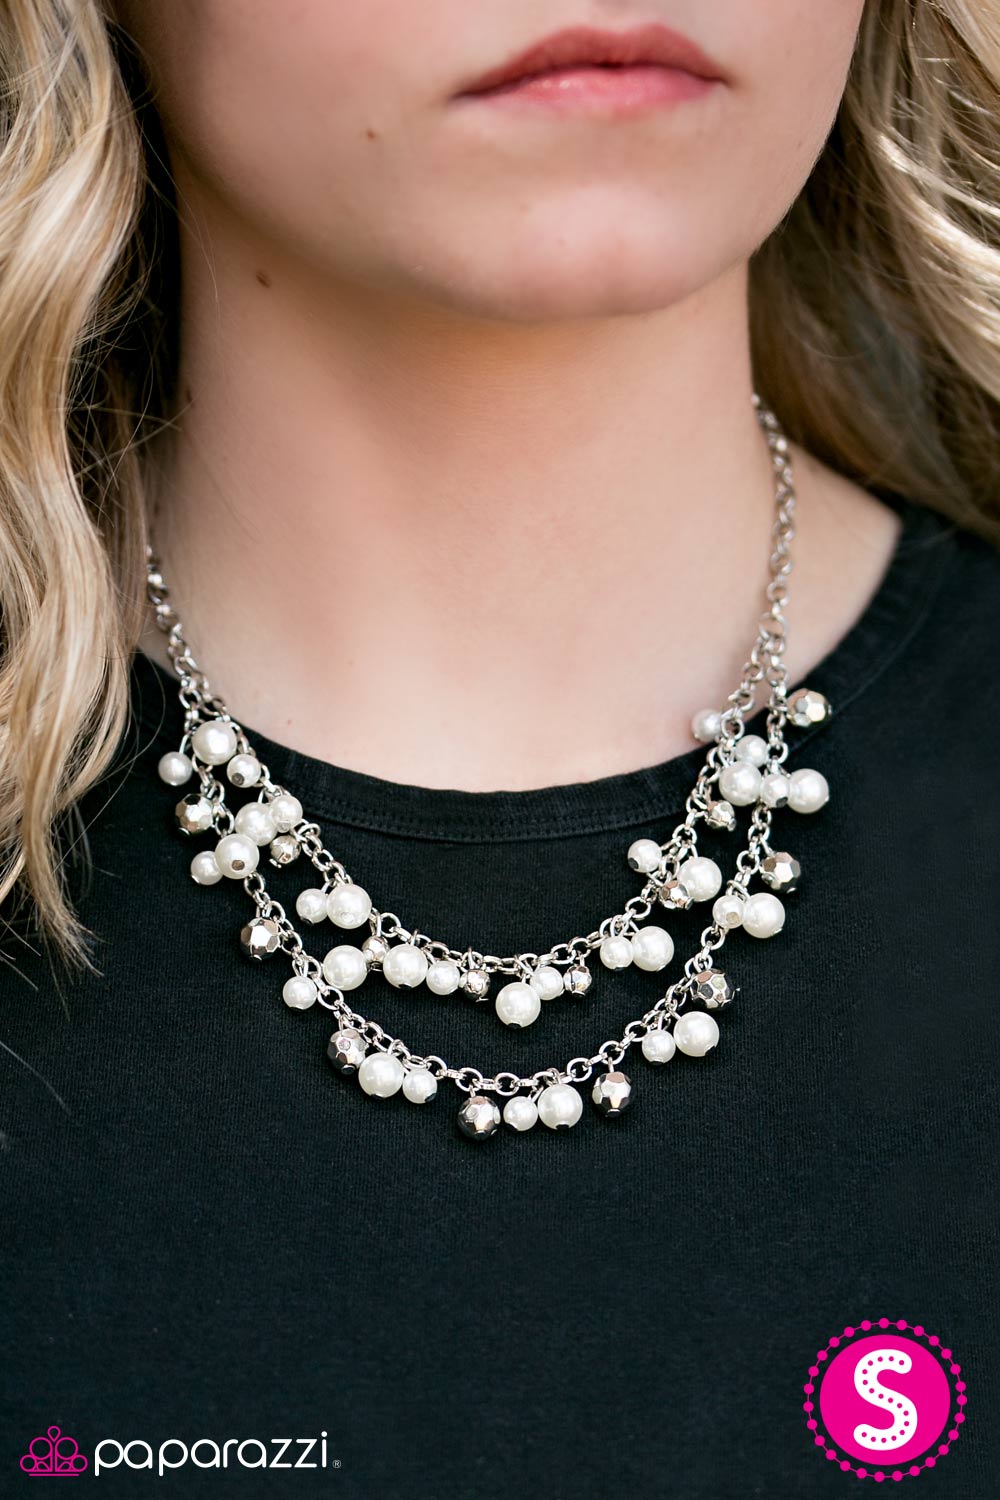 Timeless Class - White - Paparazzi necklace